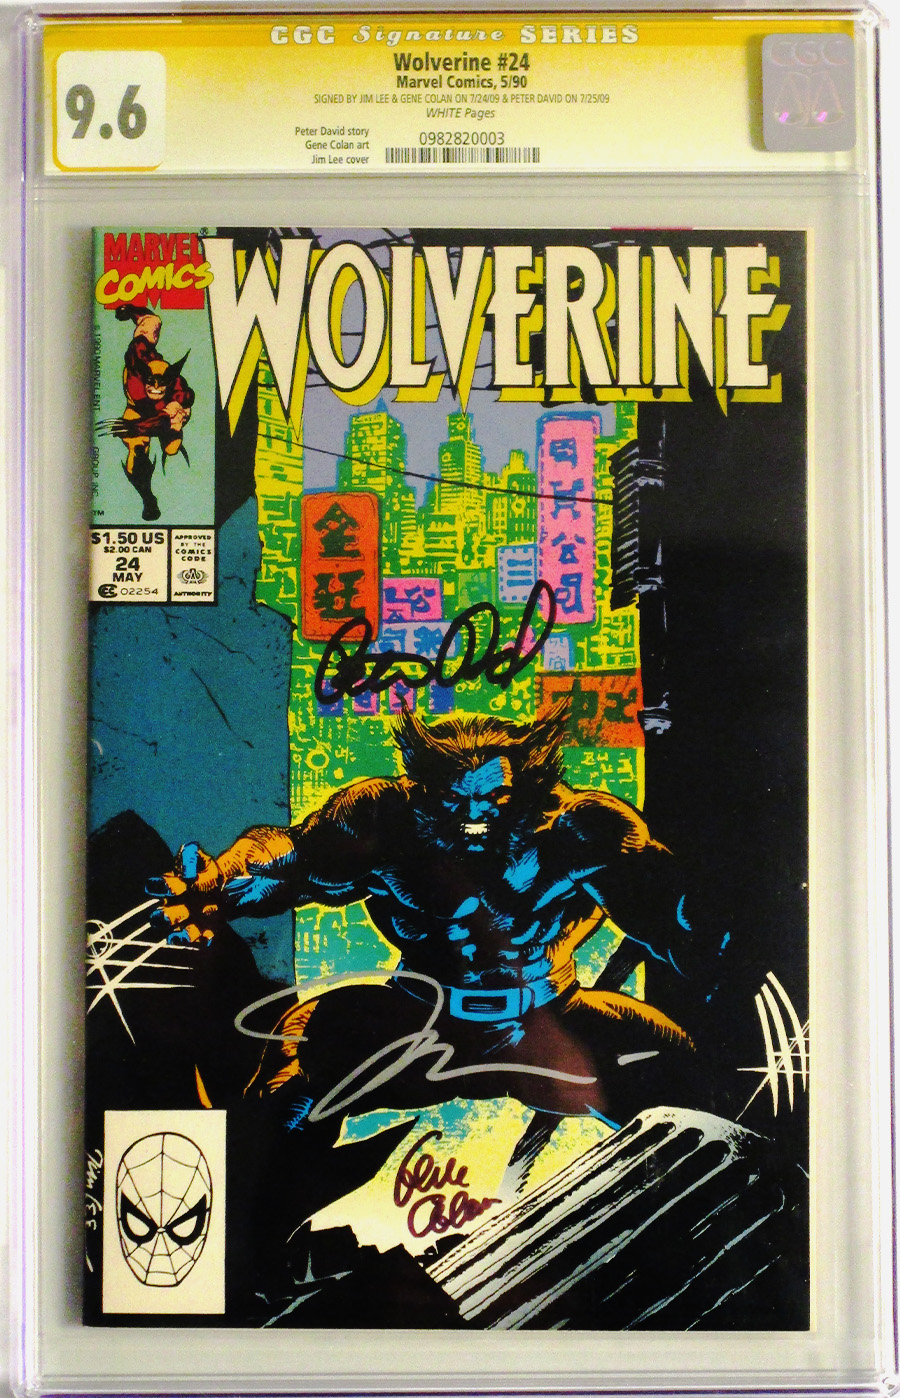 Wolverine Vol 2 #24 Cover B CGC Signature Series 9.6 Signed by Jim Lee Gene Colan & Peter David